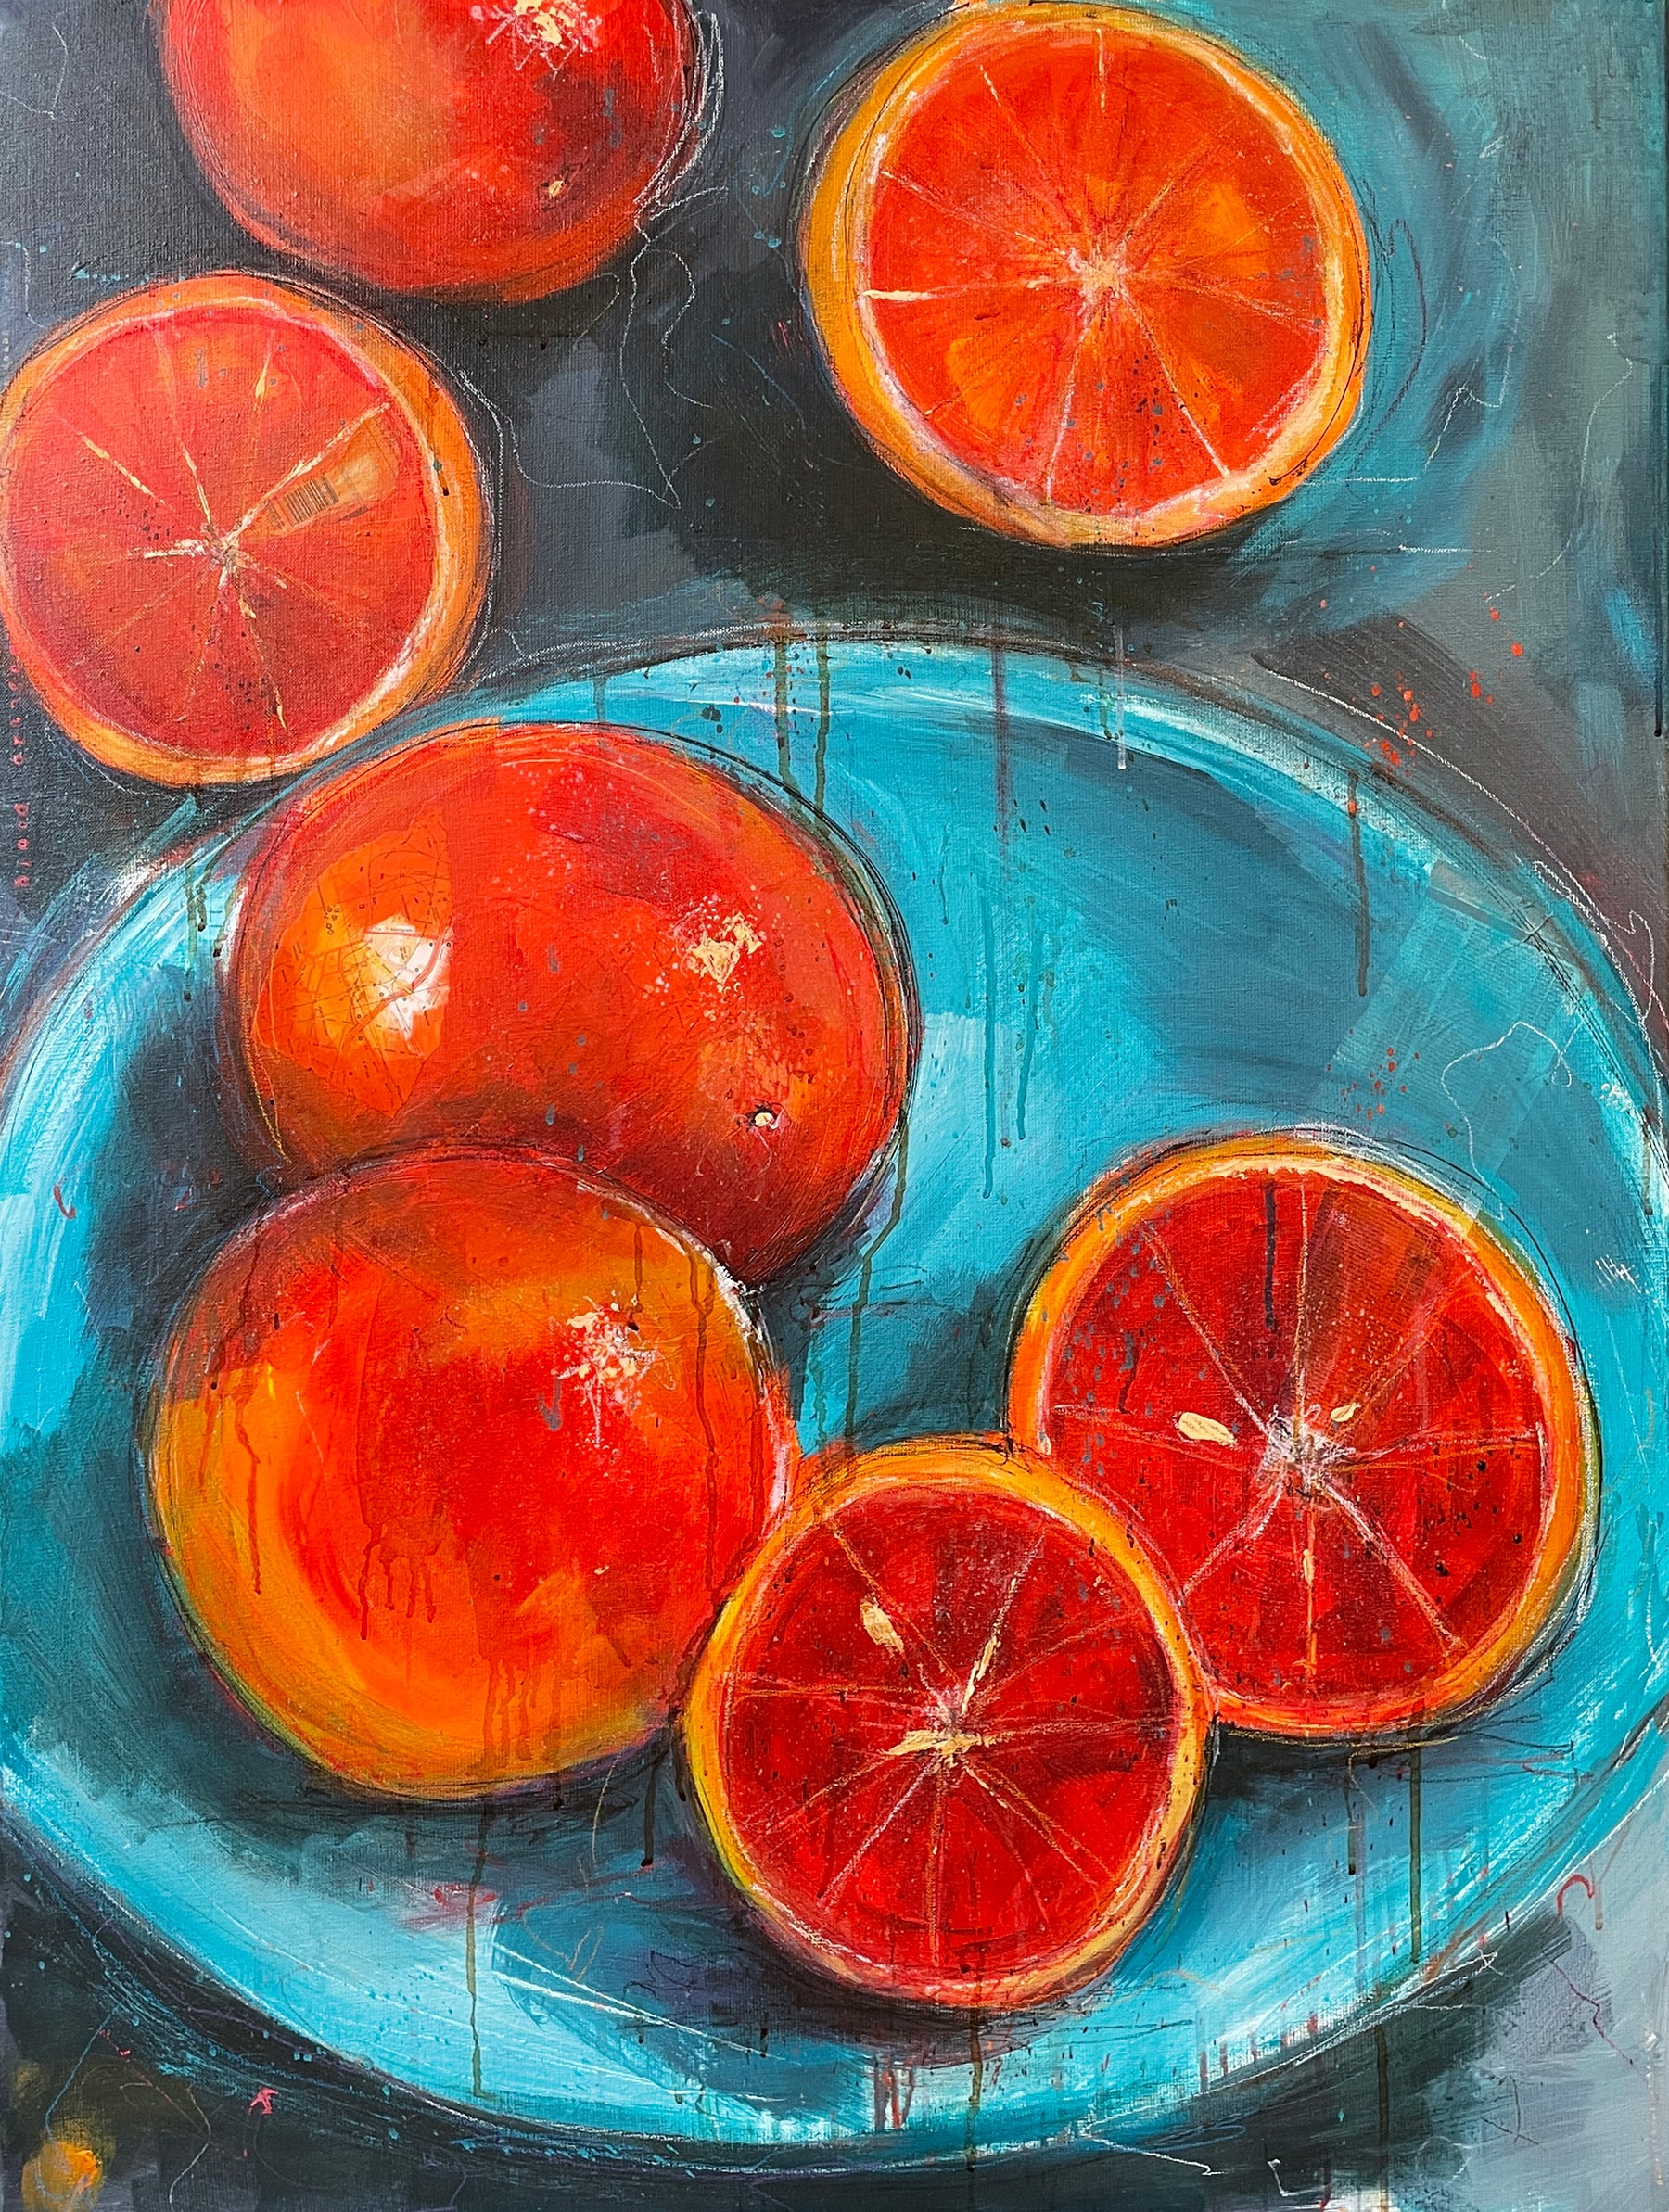 Large canvas acrylic and collage of blood oranges